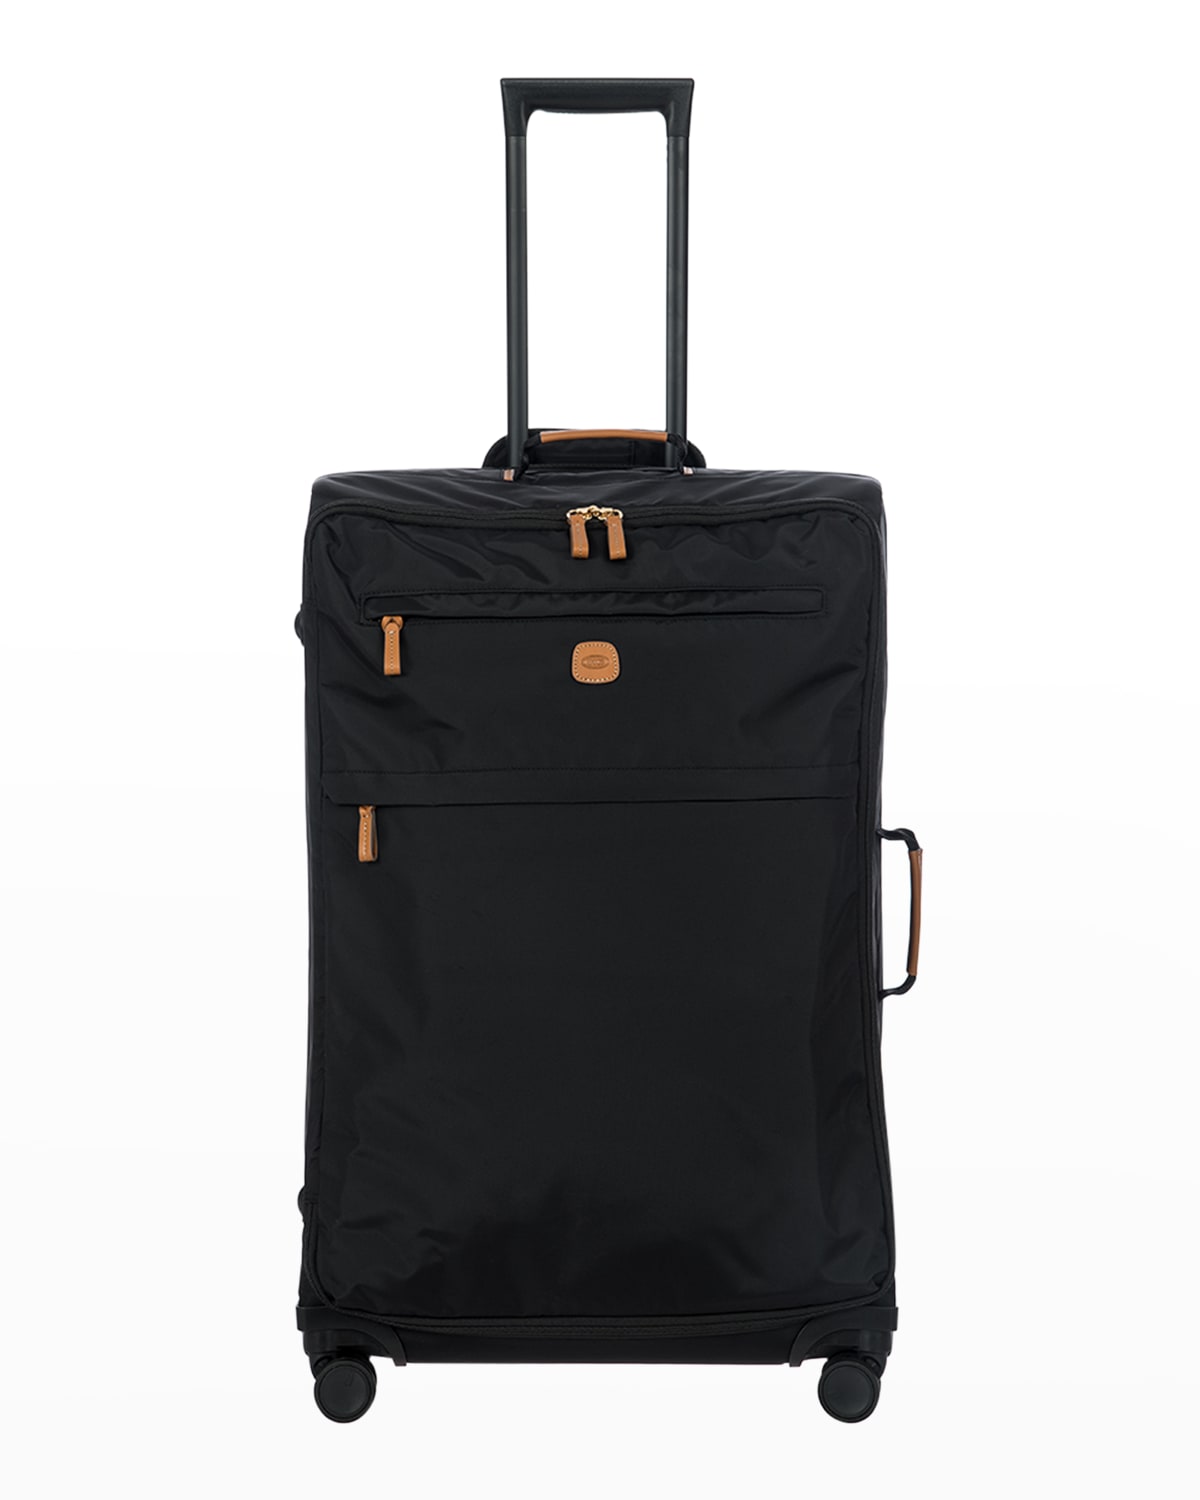 X-travel 30" Spinner Luggage In Black